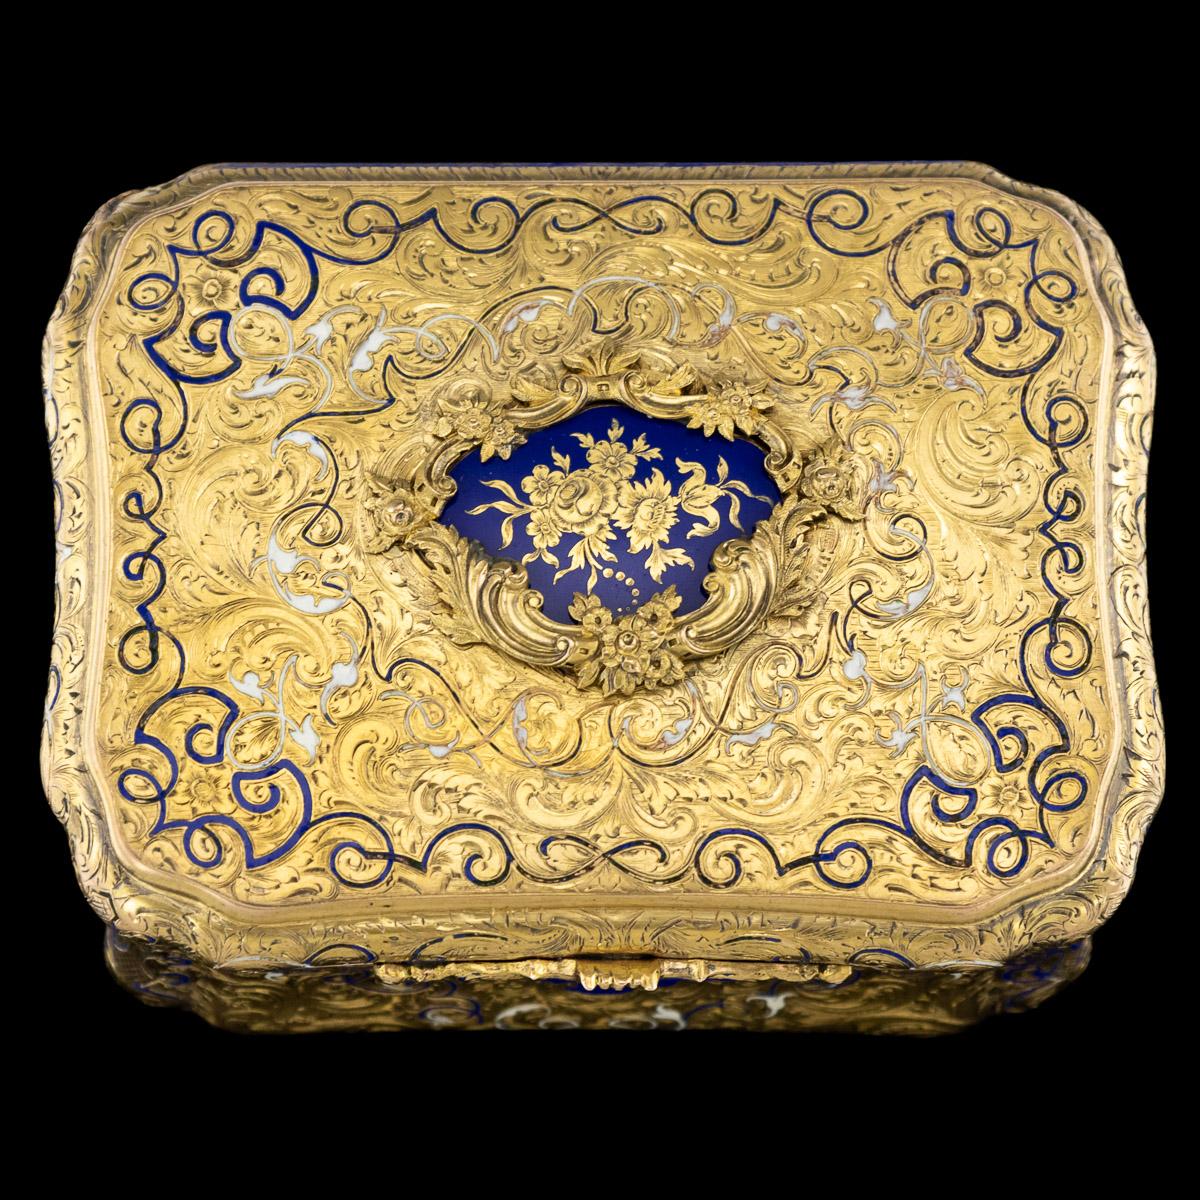 Antique mid-19th century German 14-karat solid gold snuff box, particularly large and of rectangular bombe shape, decorated with champlevé white and blue enamel tendrils, profusely engraved with scrolled foliage and flowers on reeded ground, the